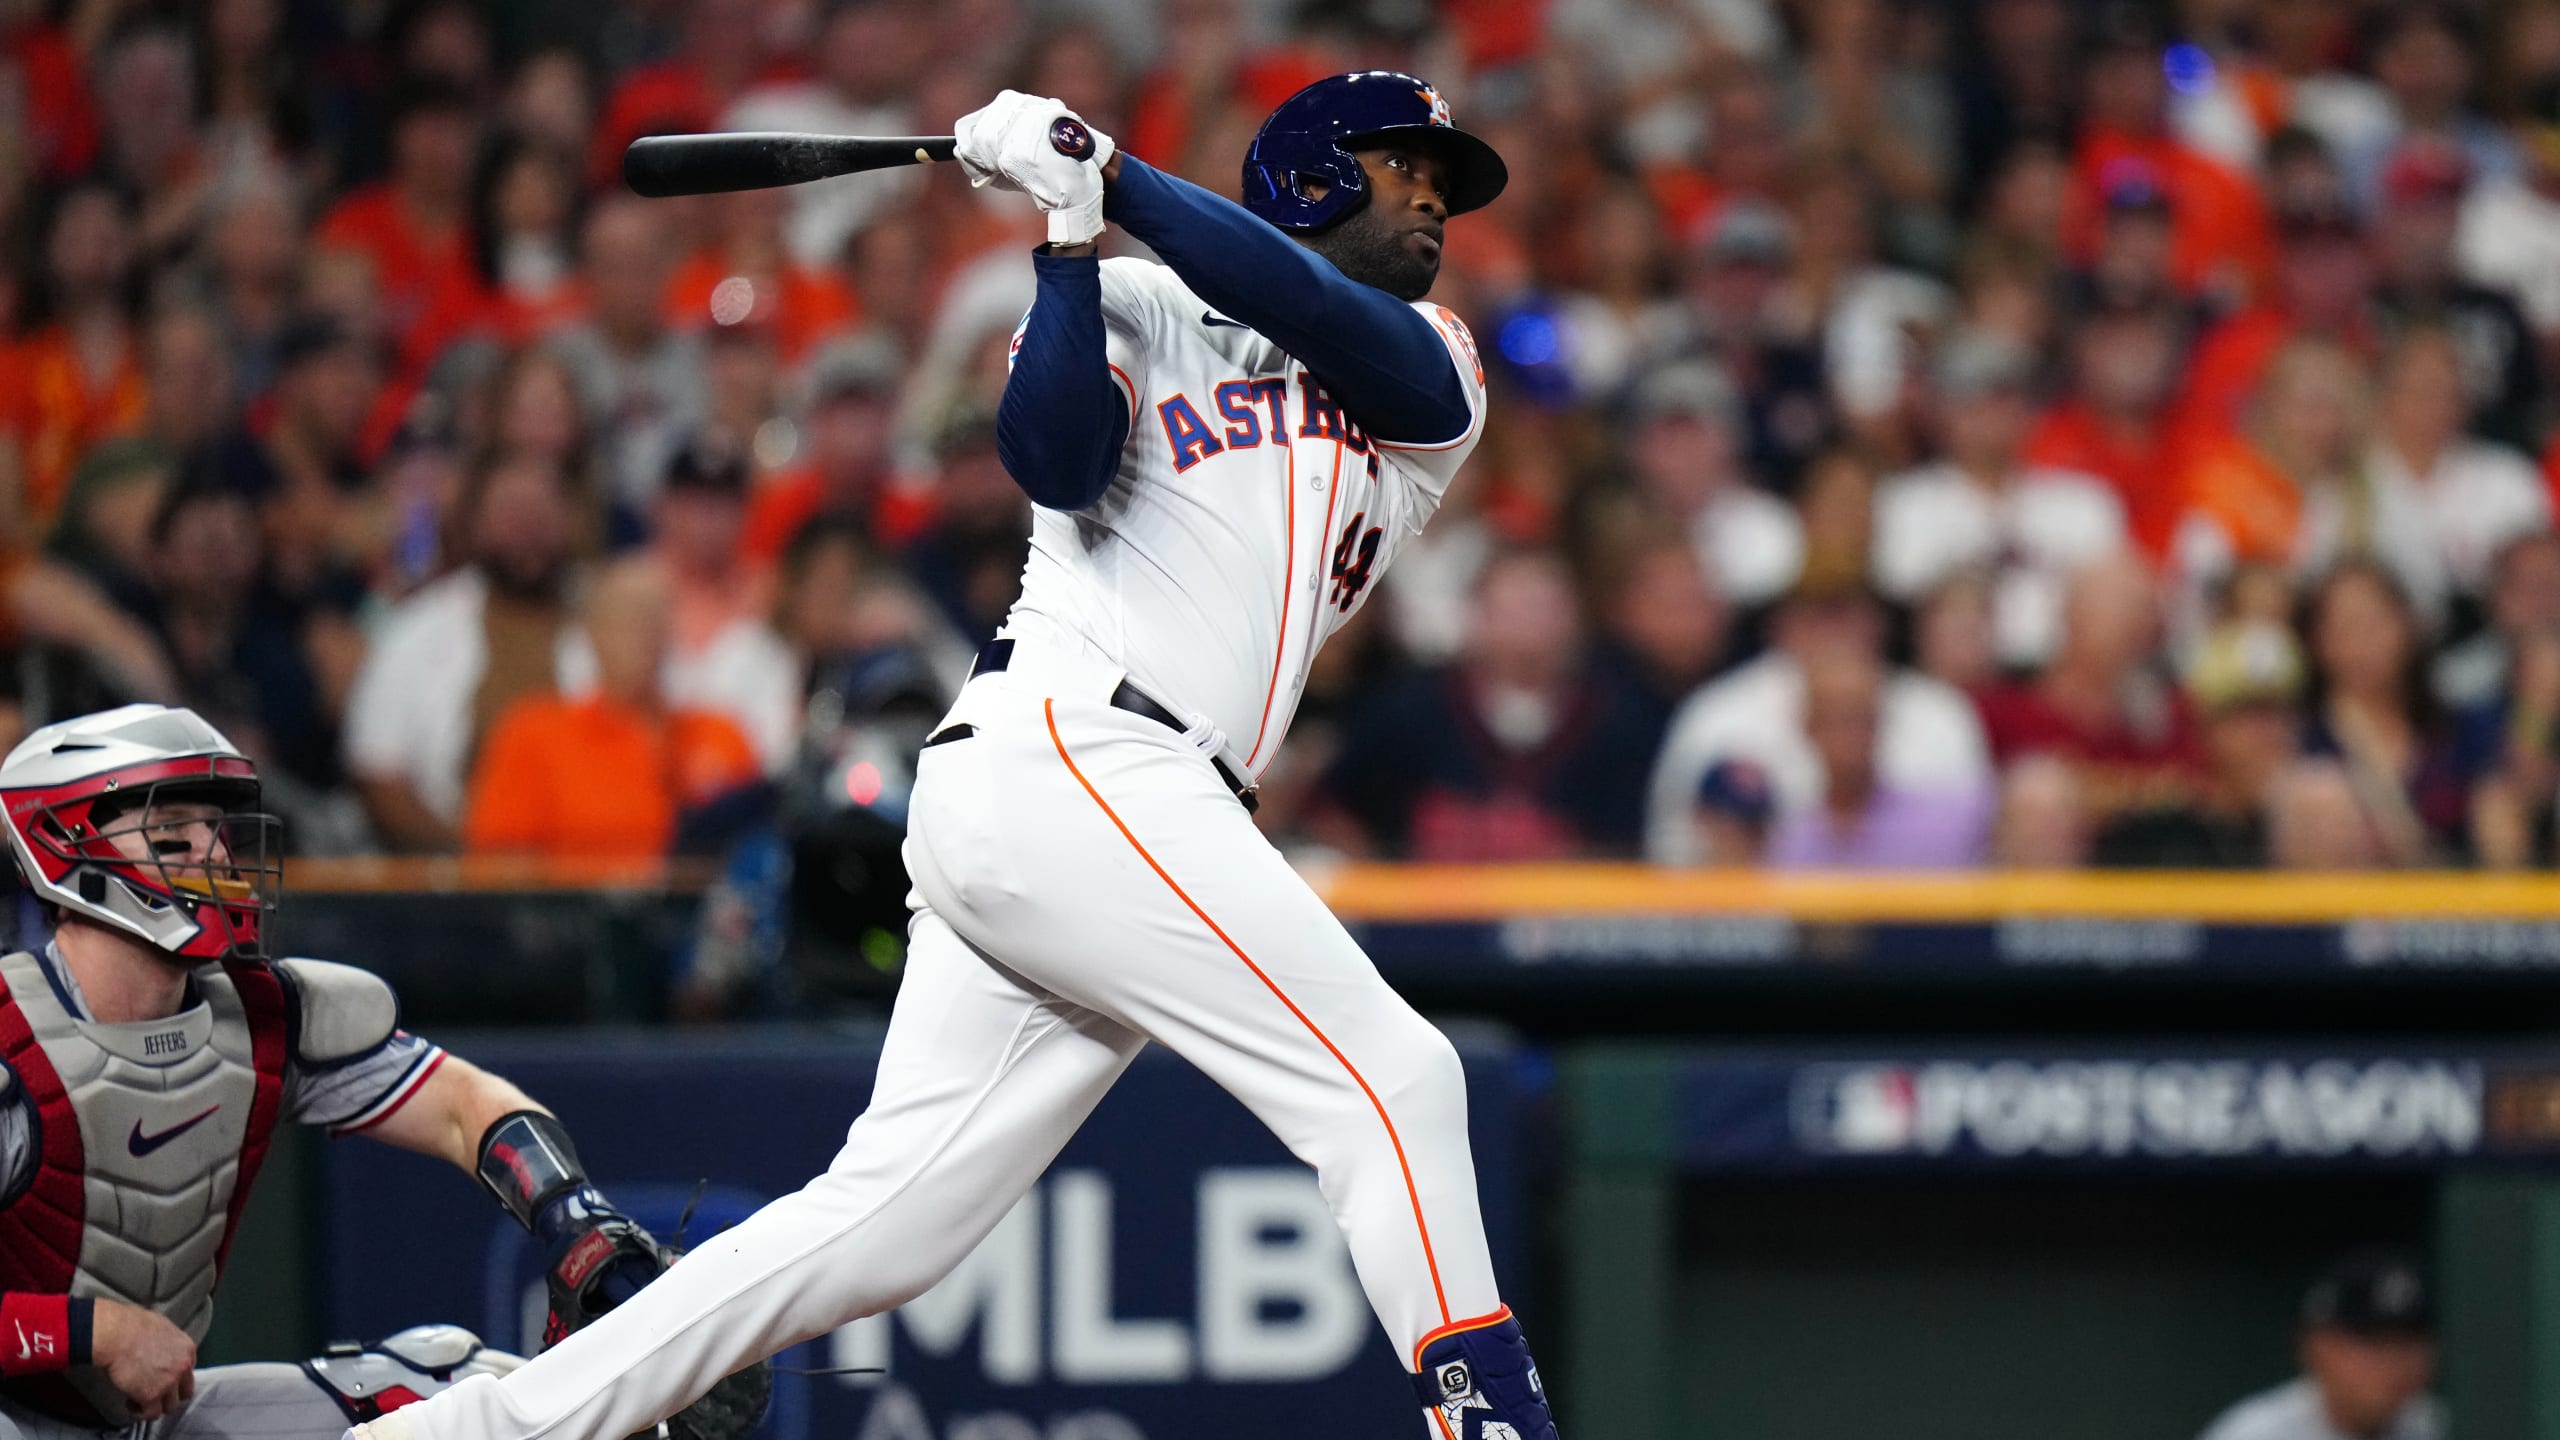 Yordan Alvarez's walk-off homer soared to new MLB postseason heights:  Stark's Weird and Wild on Division Series Day 1 - The Athletic